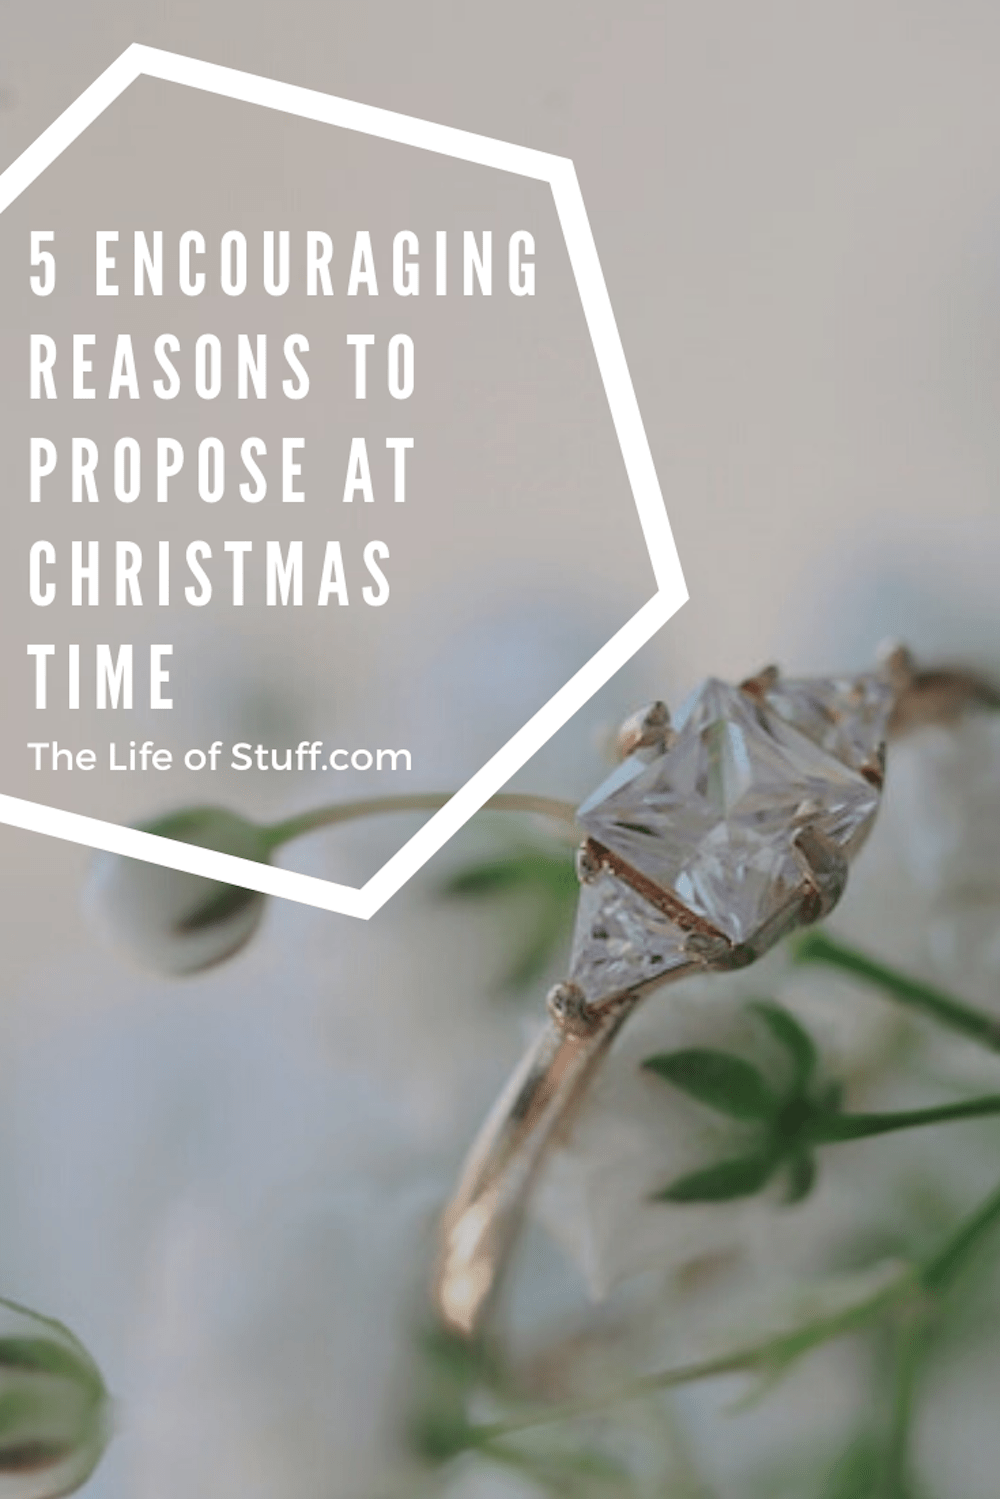 5 Encouraging Reasons To Propose At Christmas Time - The Life of Stuff